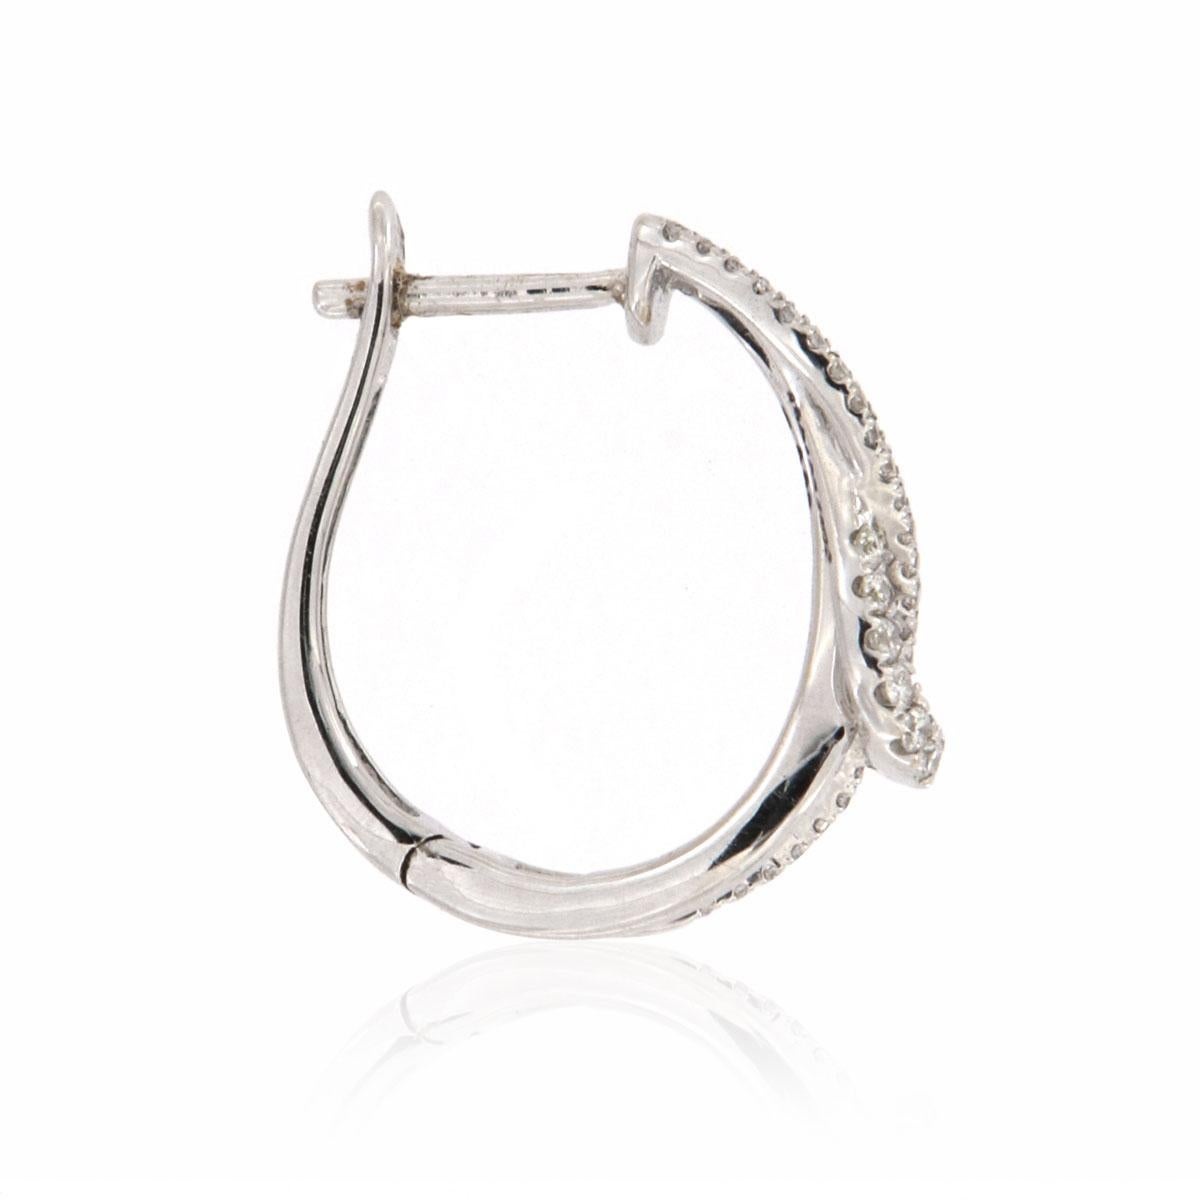 These sparkling hoop earrings feature 0.35-carat diamonds in the pave setting. Experience the Difference!

Product details: 

Center Gemstone Type: NATURAL DIAMOND
Center Gemstone Color: WHITE
Side Gemstone Type: NATURAL DIAMOND
Side Gemstone Shape: